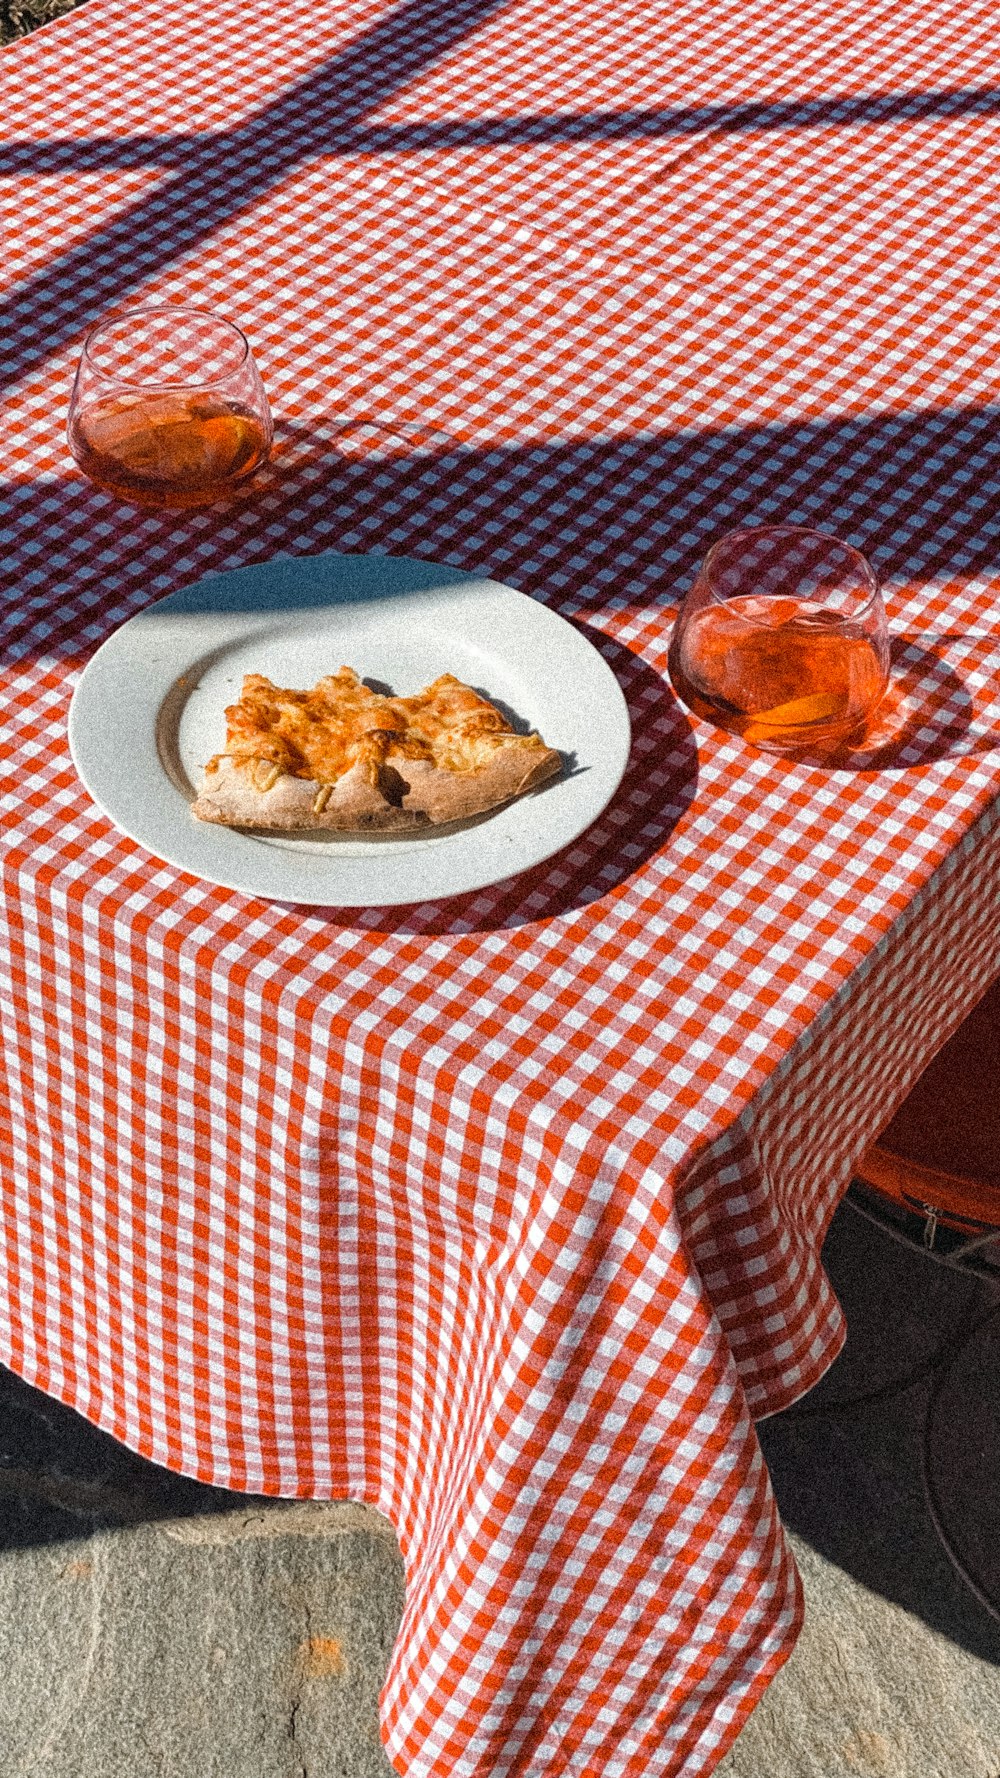 a plate of pizza on a checkered table cloth